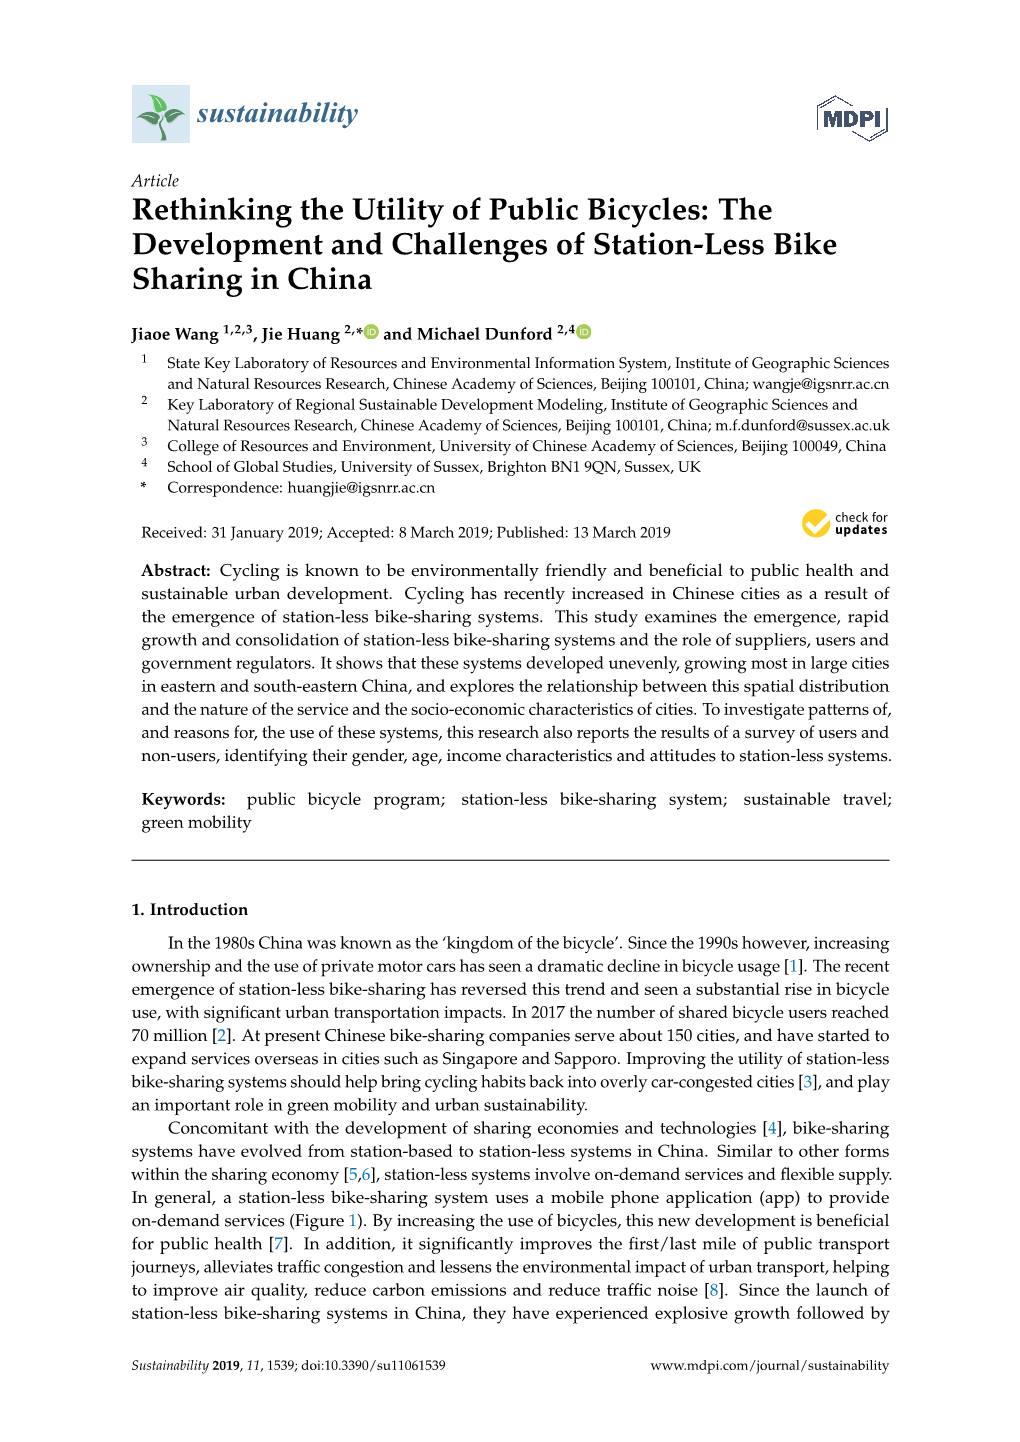 The Development and Challenges of Station-Less Bike Sharing in China